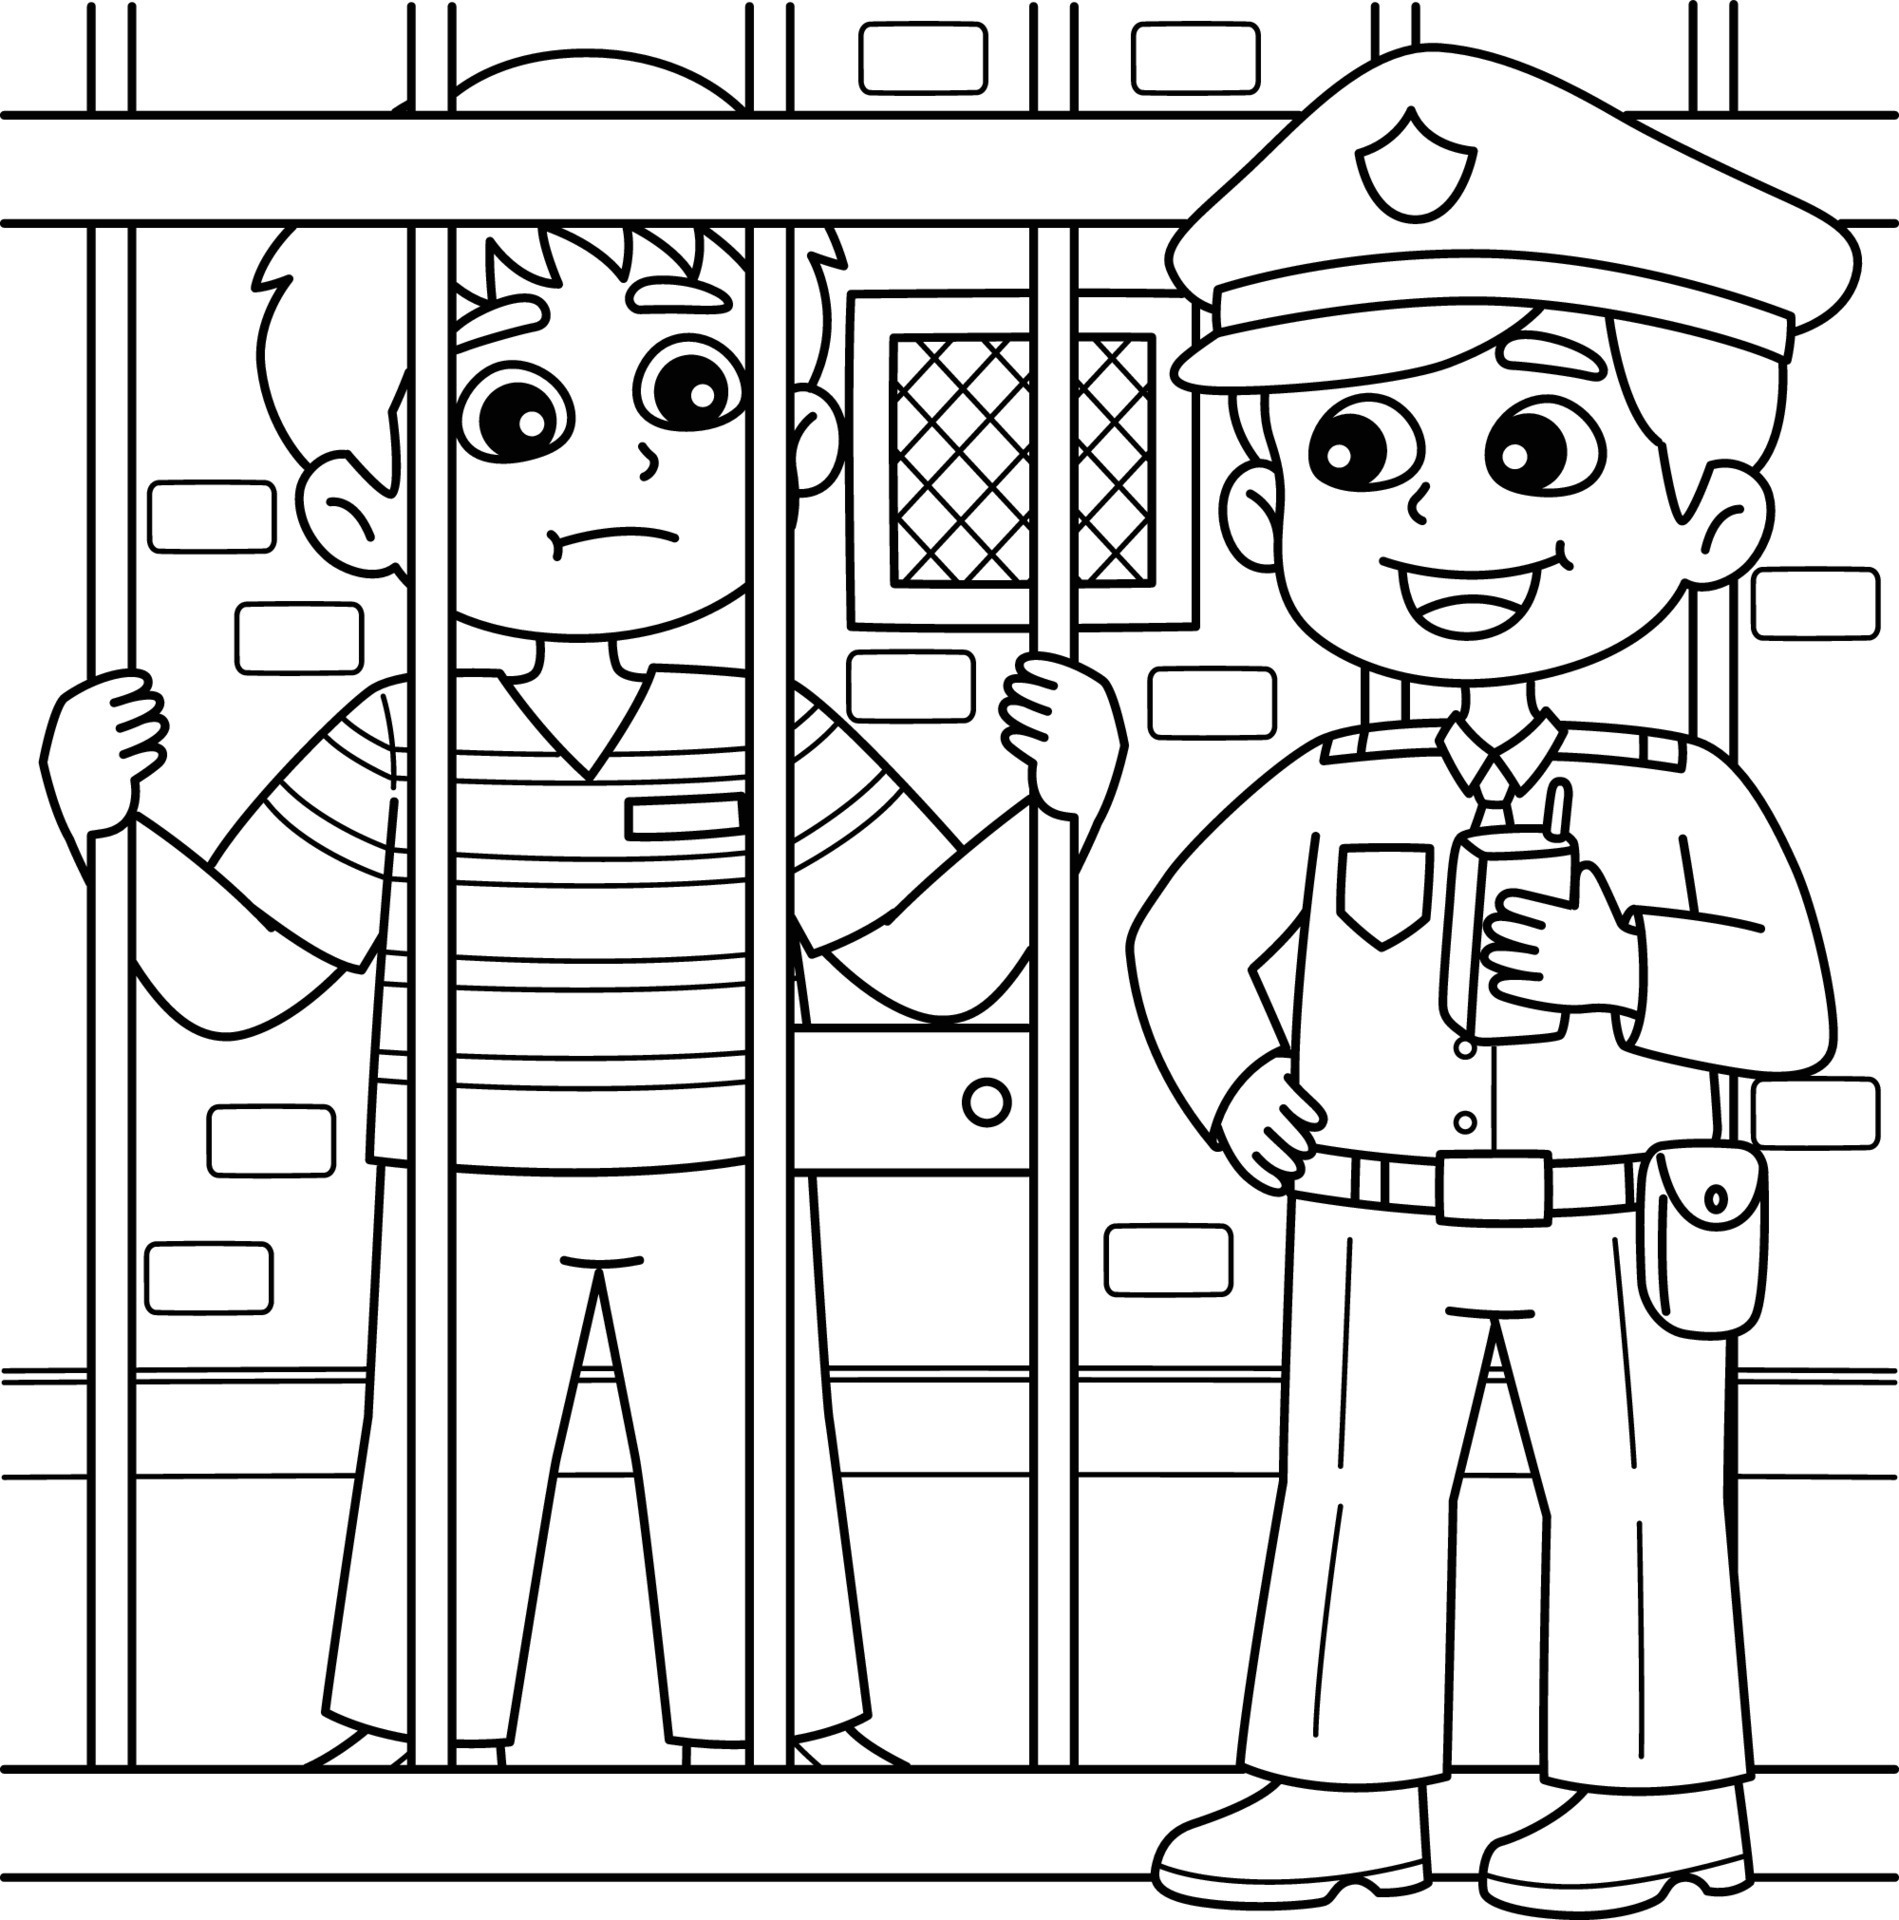 police station coloring page